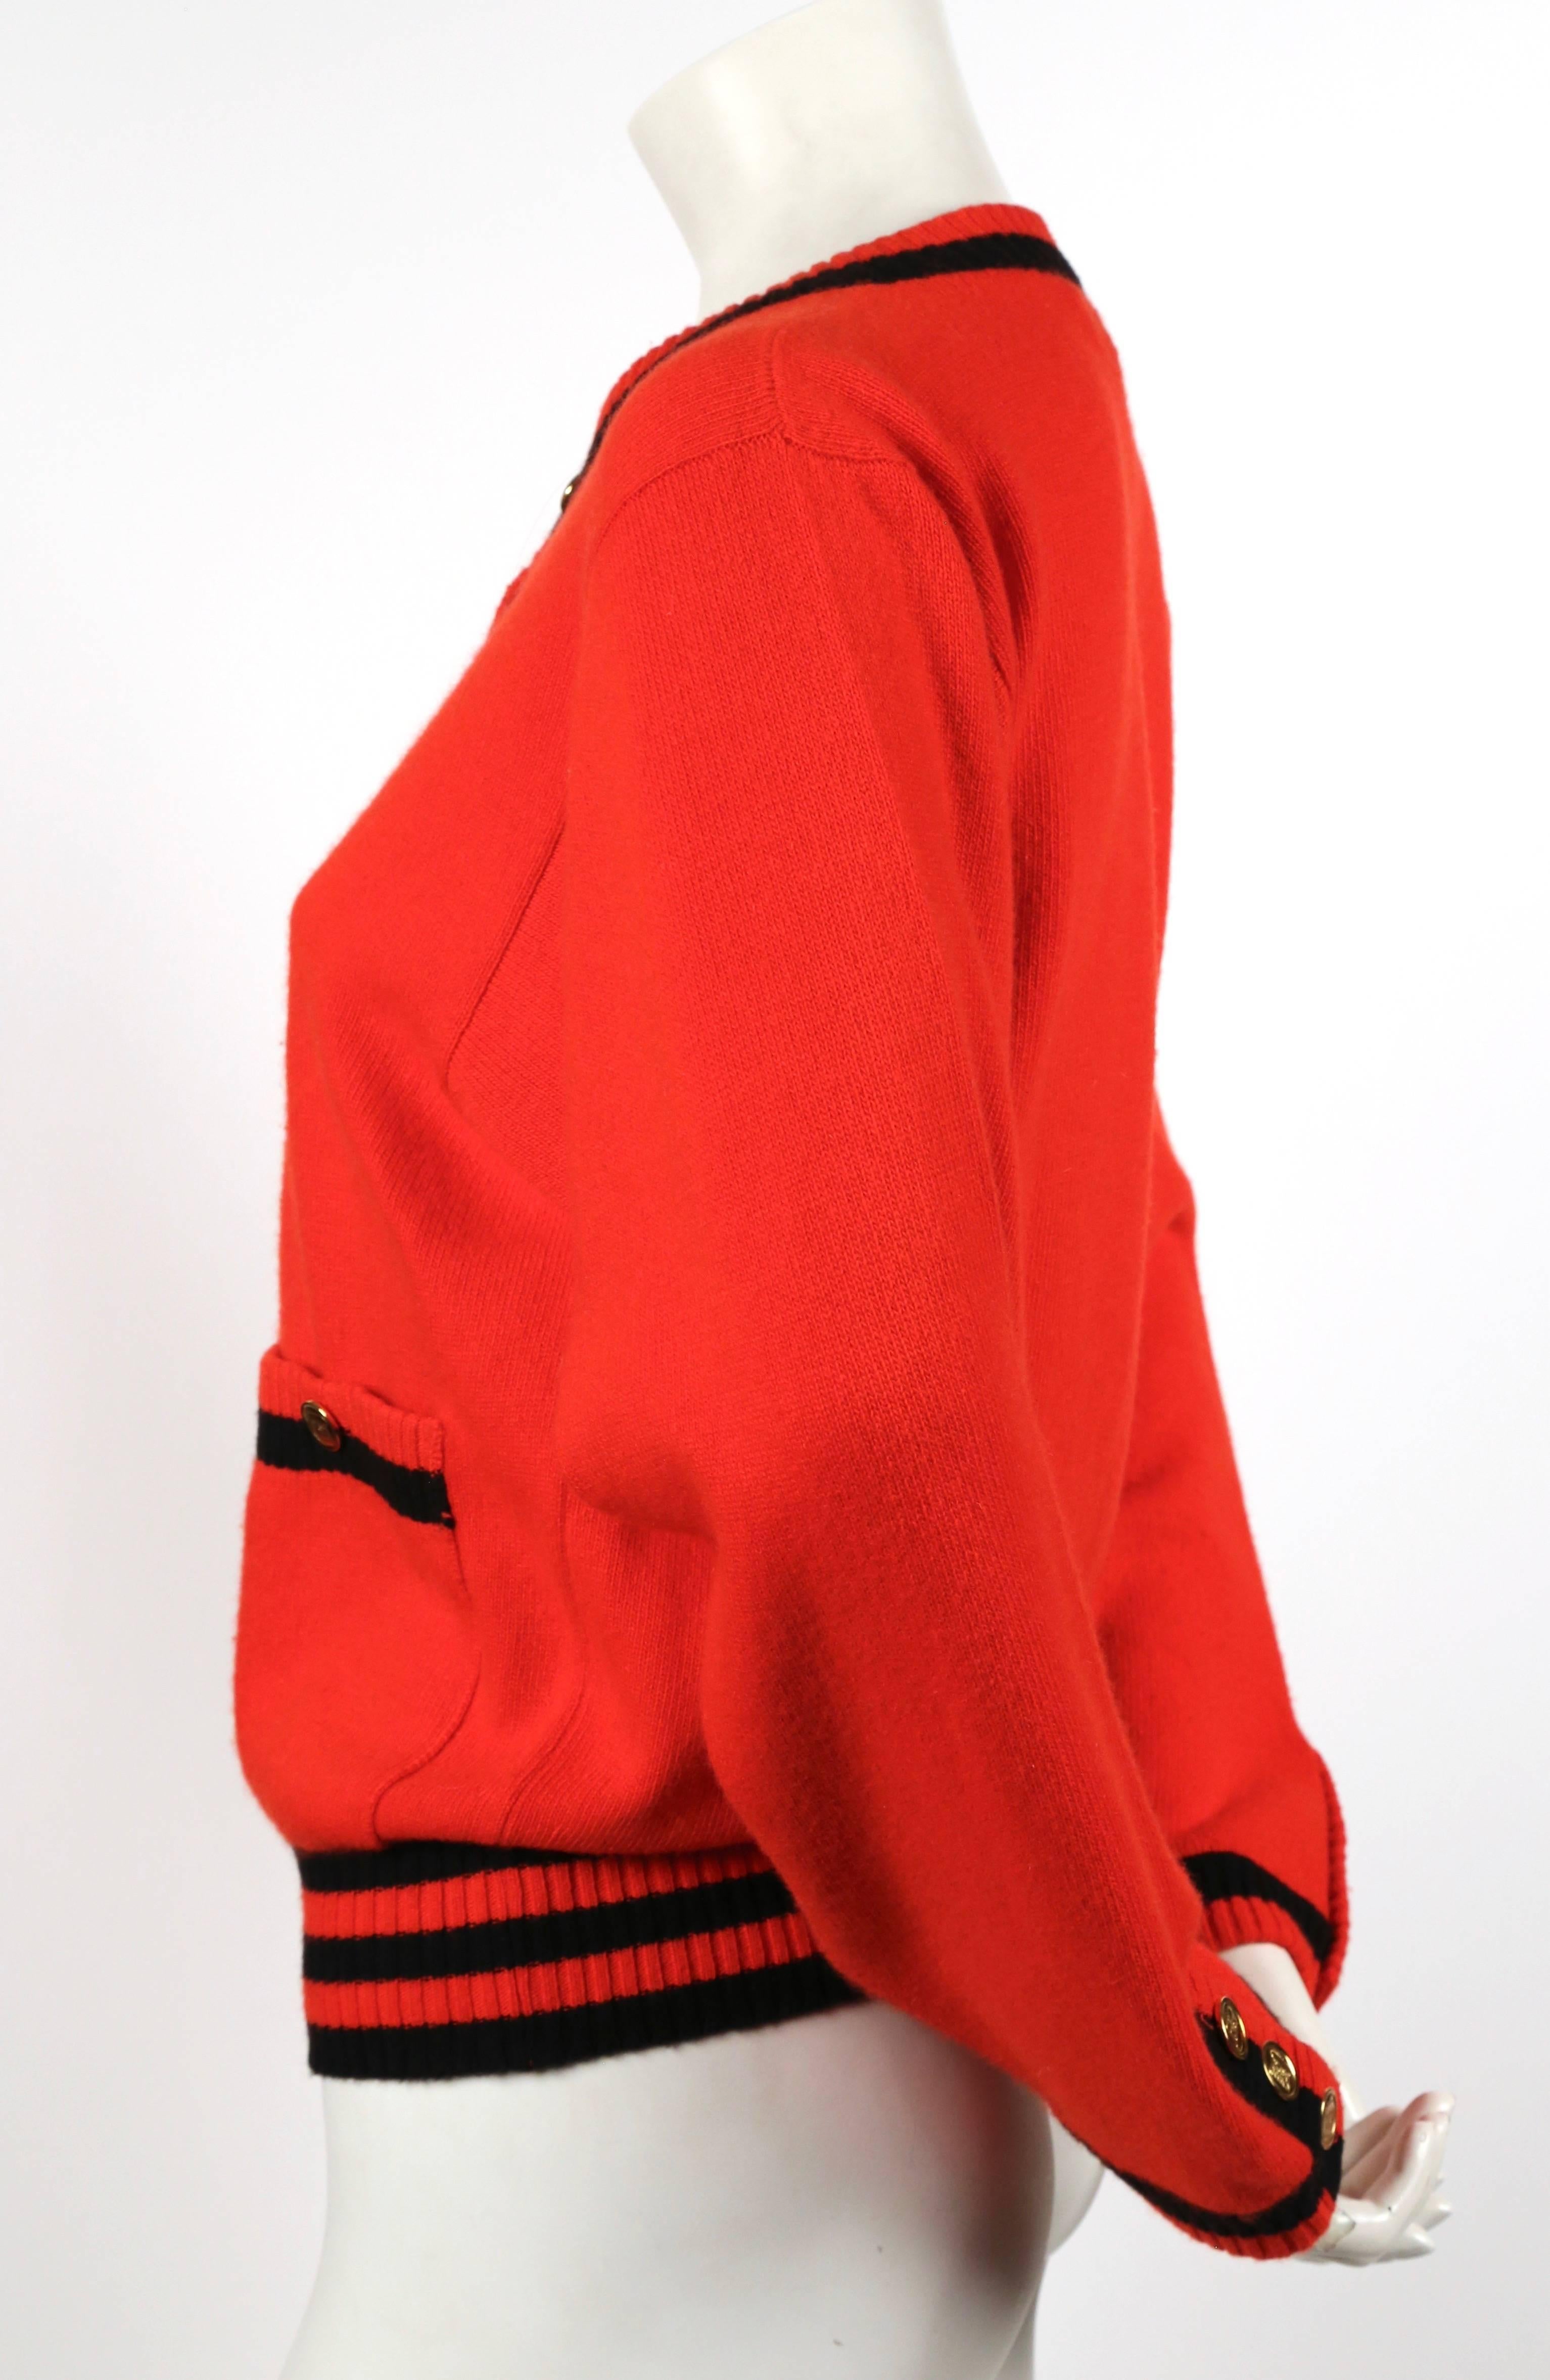 Classic red and black cashmere cardigan with ribbed striped trip and gilt buttons from Chanel dating to the 1980's. Labeled a size S. Approximate measurements: shoulder 16